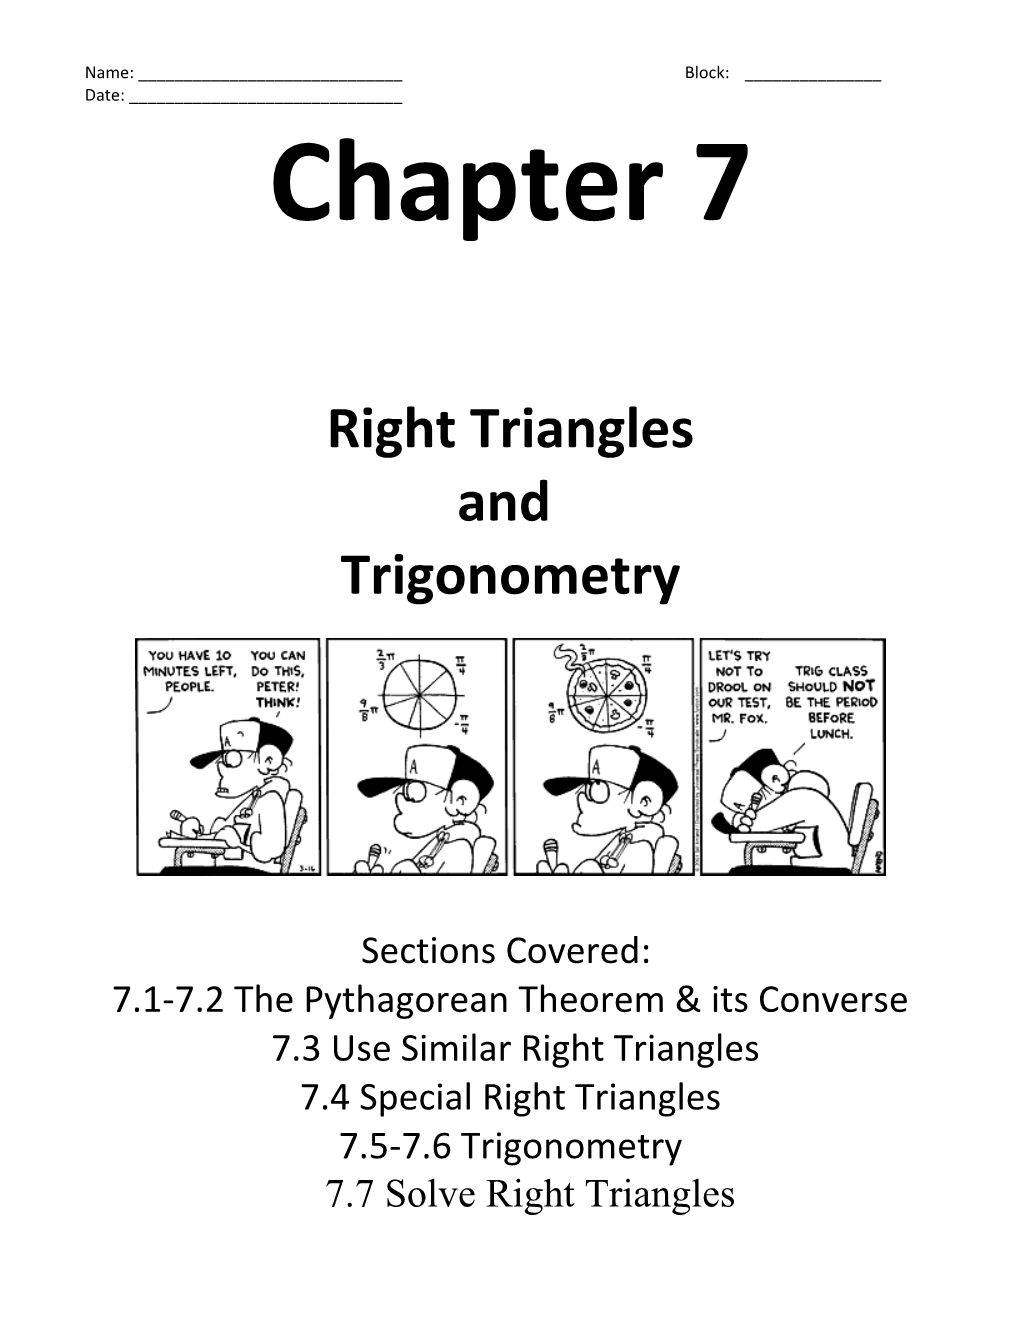 7.1-7.2 the Pythagorean Theorem & Its Converse